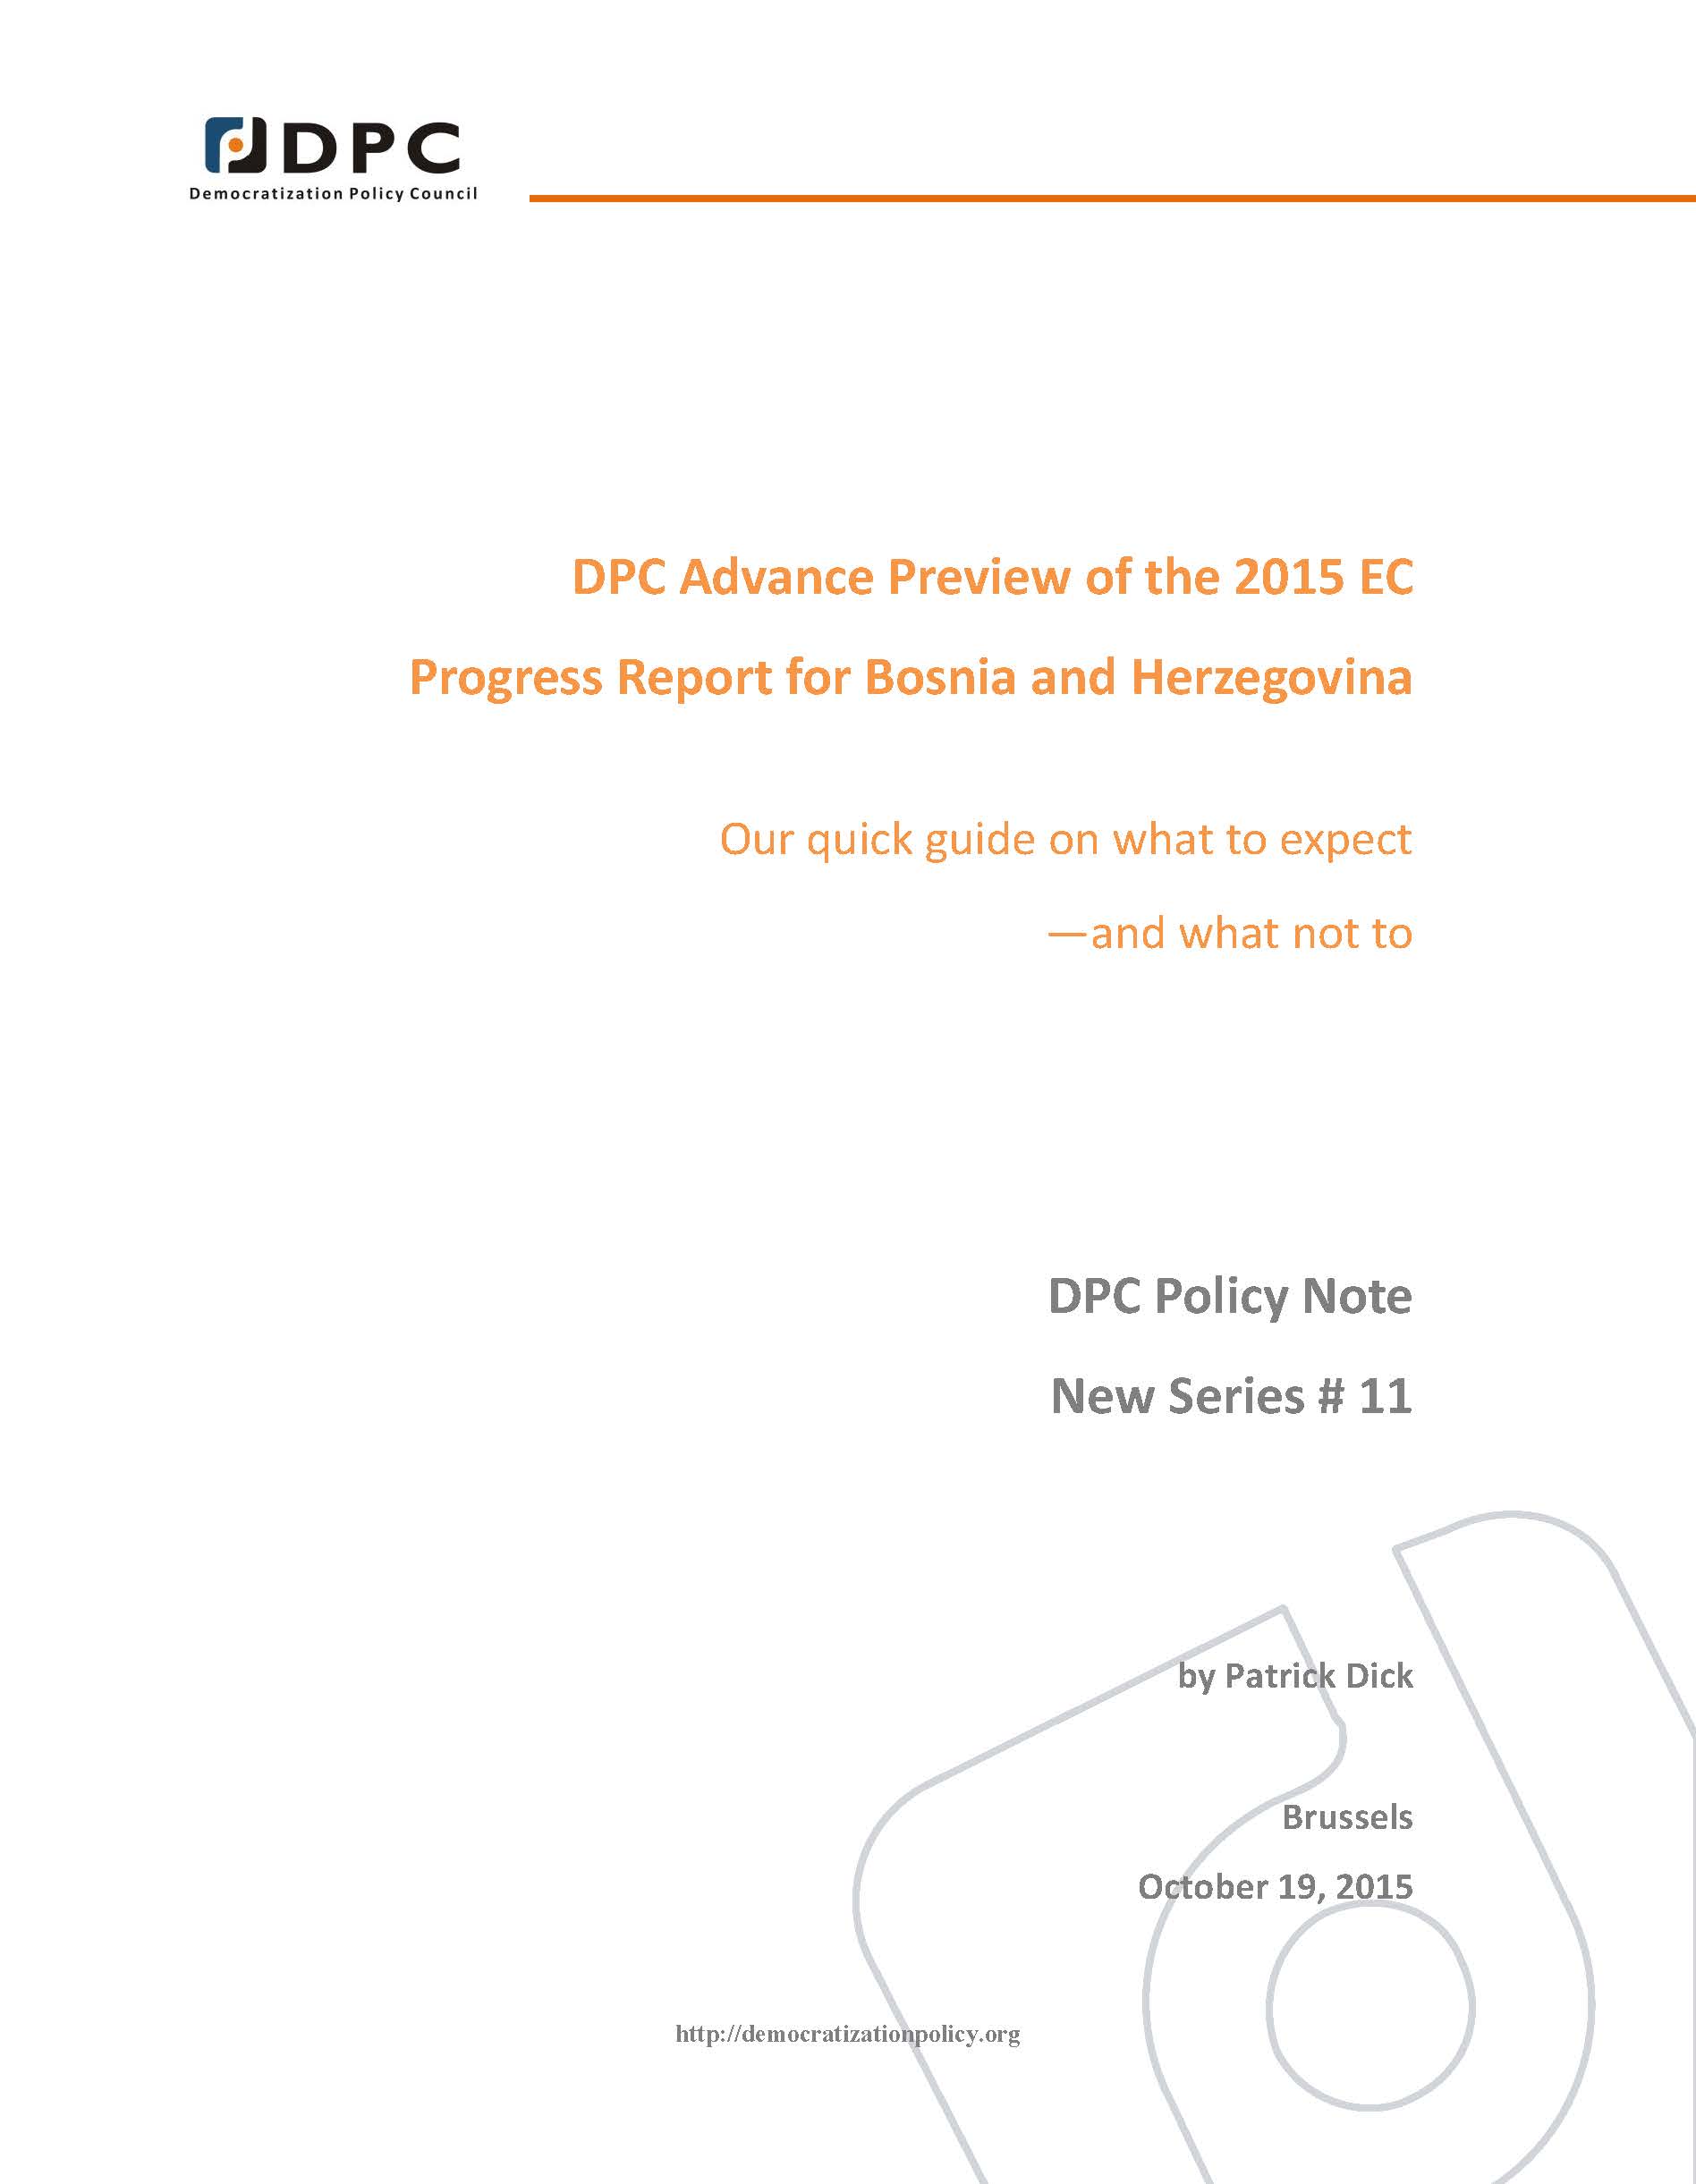 DPC POLICY NOTE 11: DPC Advance Preview of the 2015 EC. Progress Report for Bosnia and Herzegovina. Our quick guide on what to expect—and what not to.